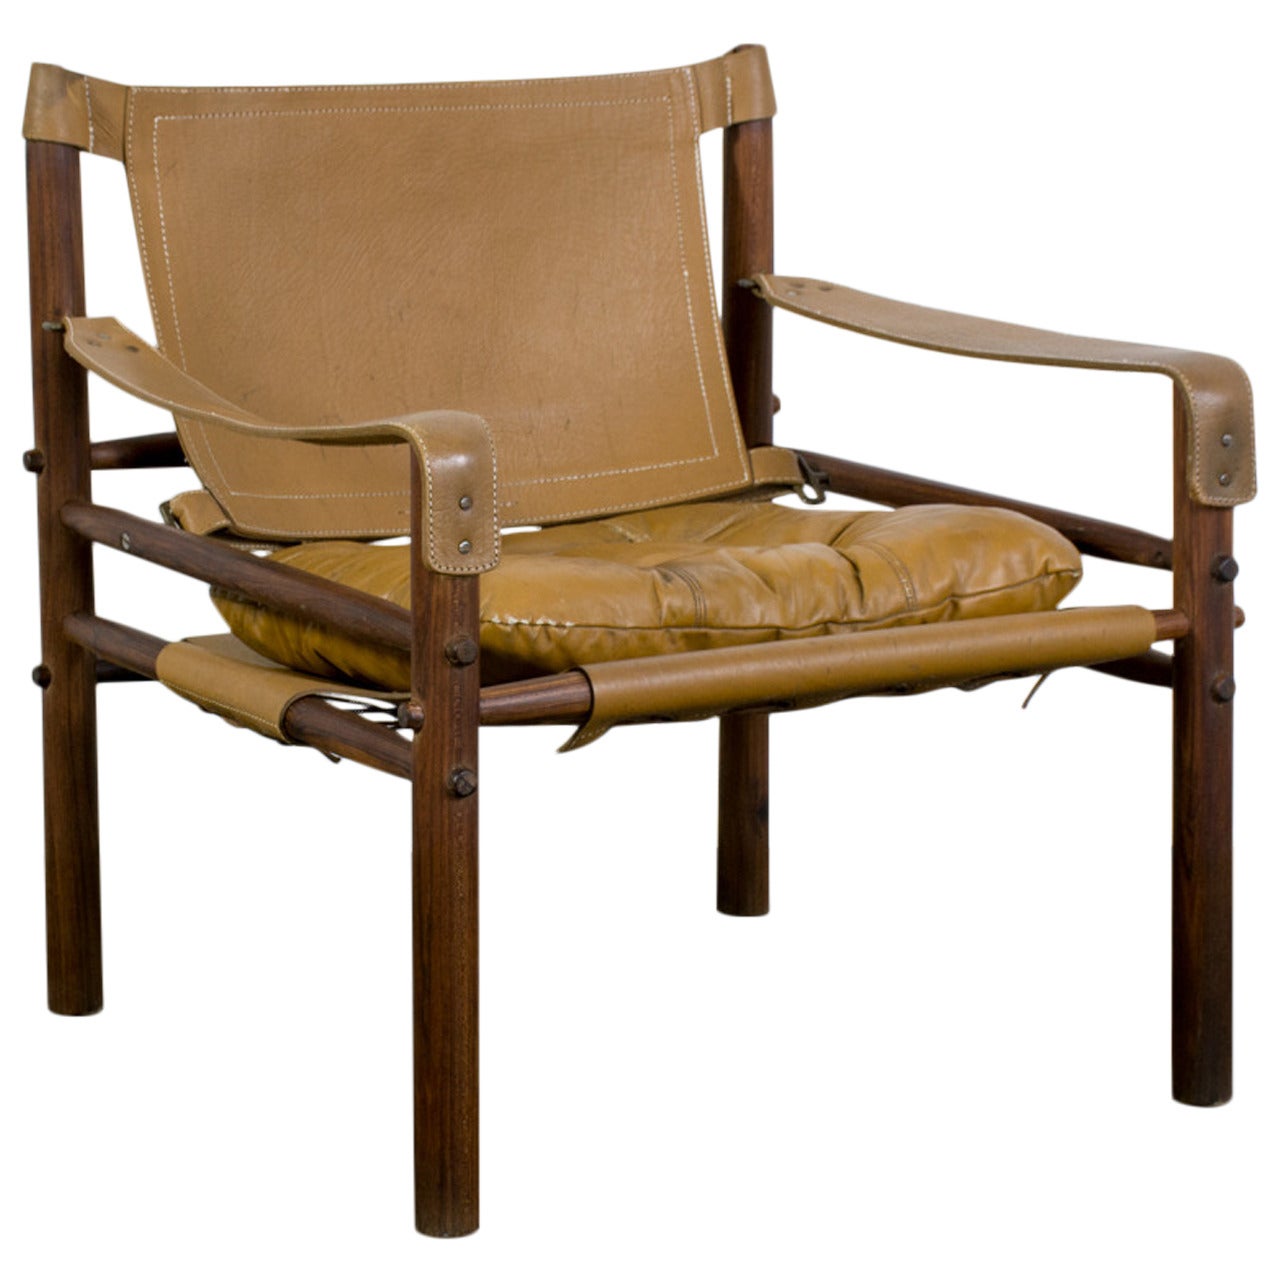 Vintage Mid-Century "Sirocco" Safari Chair by Arne Norell